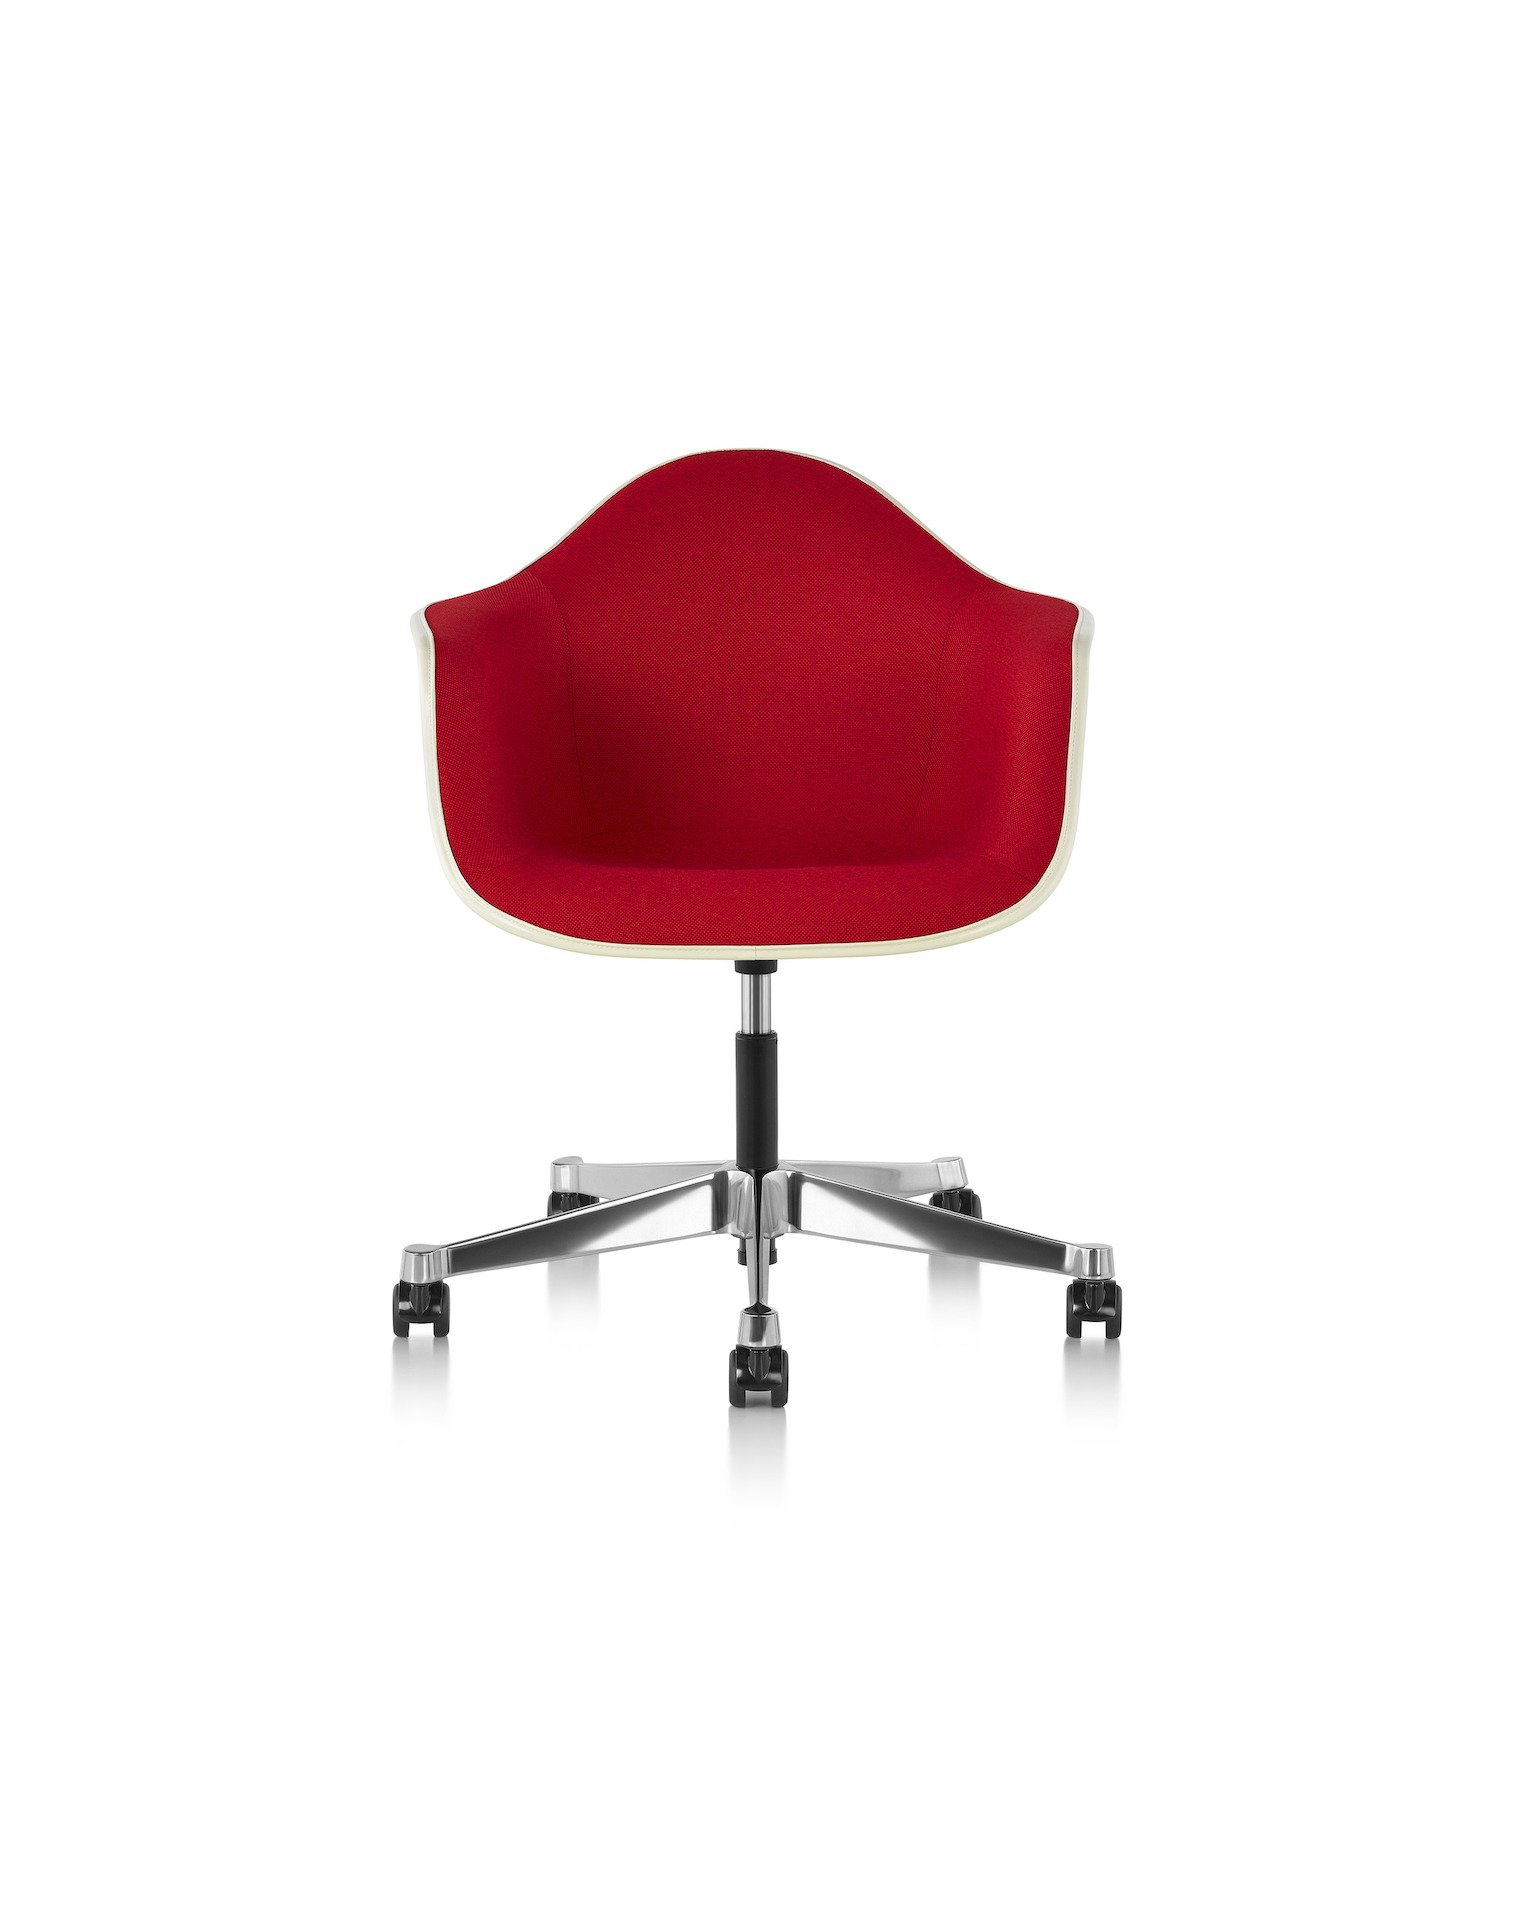 Eames Task Chair with Fiberglass Shell, viewed from front